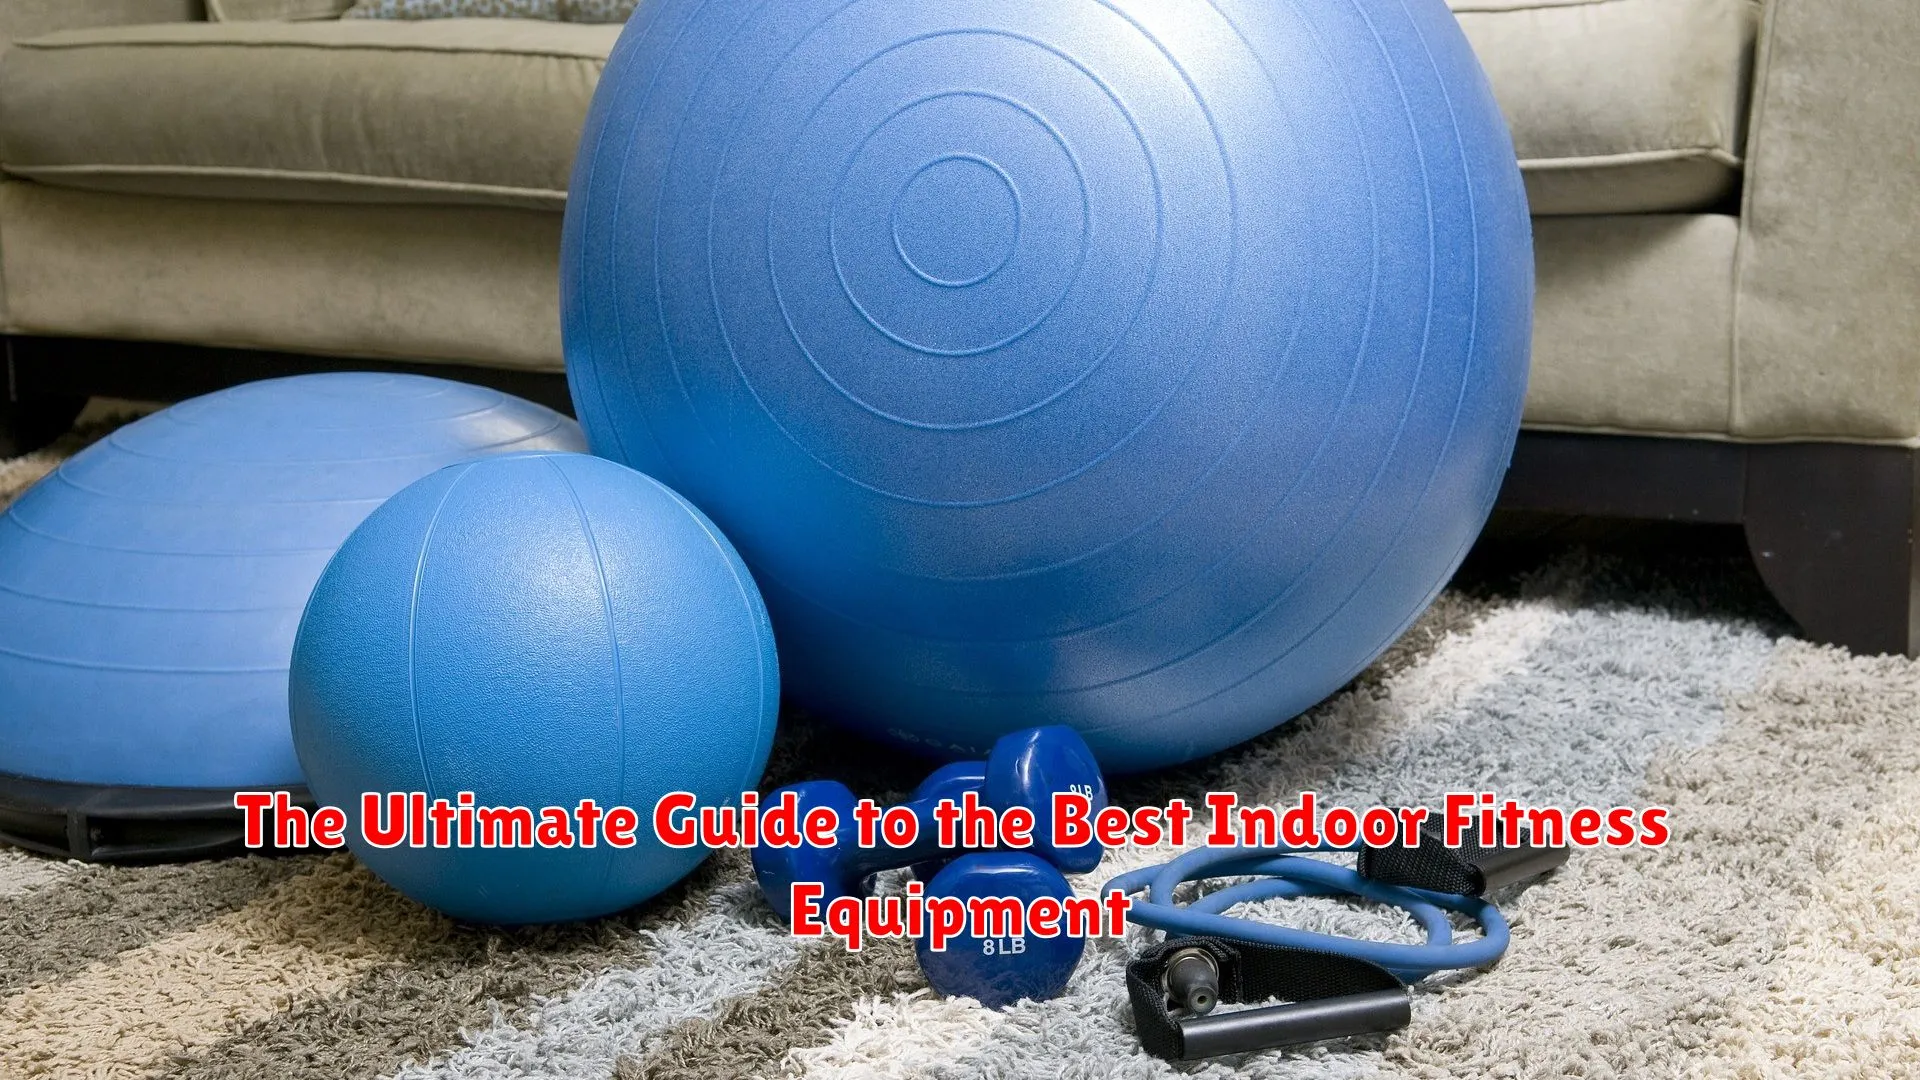 The Ultimate Guide to the Best Indoor Fitness Equipment